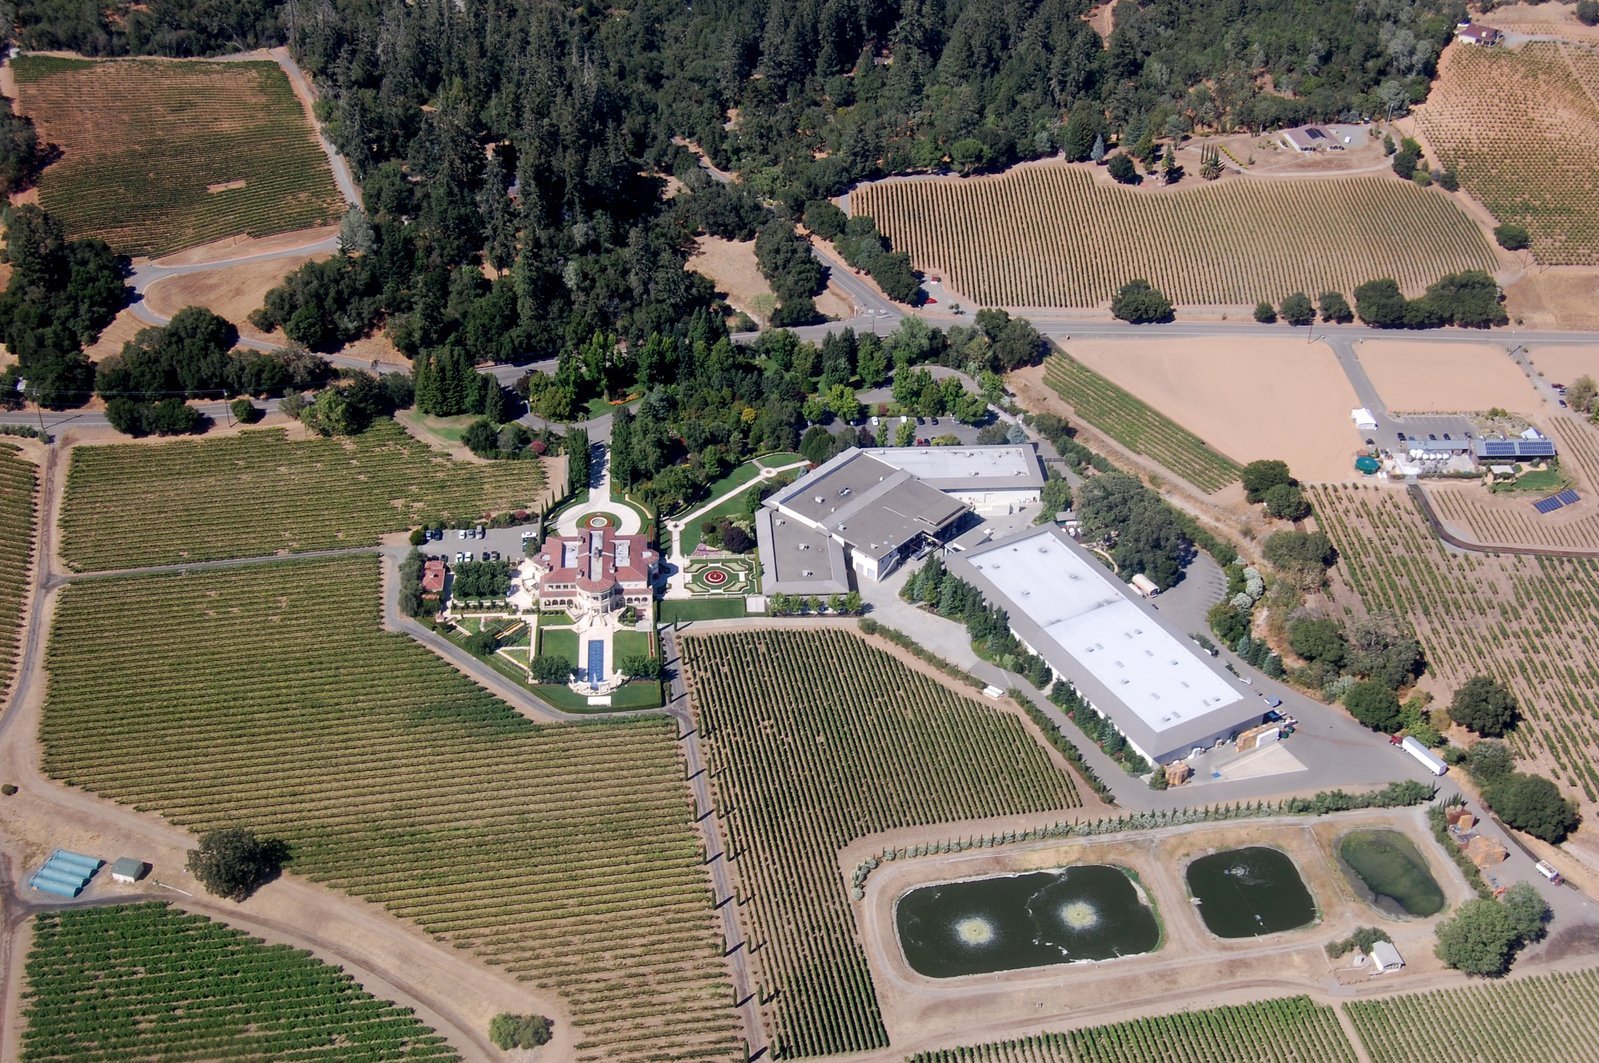 an aerial view of an estate with an apple orchard in the background